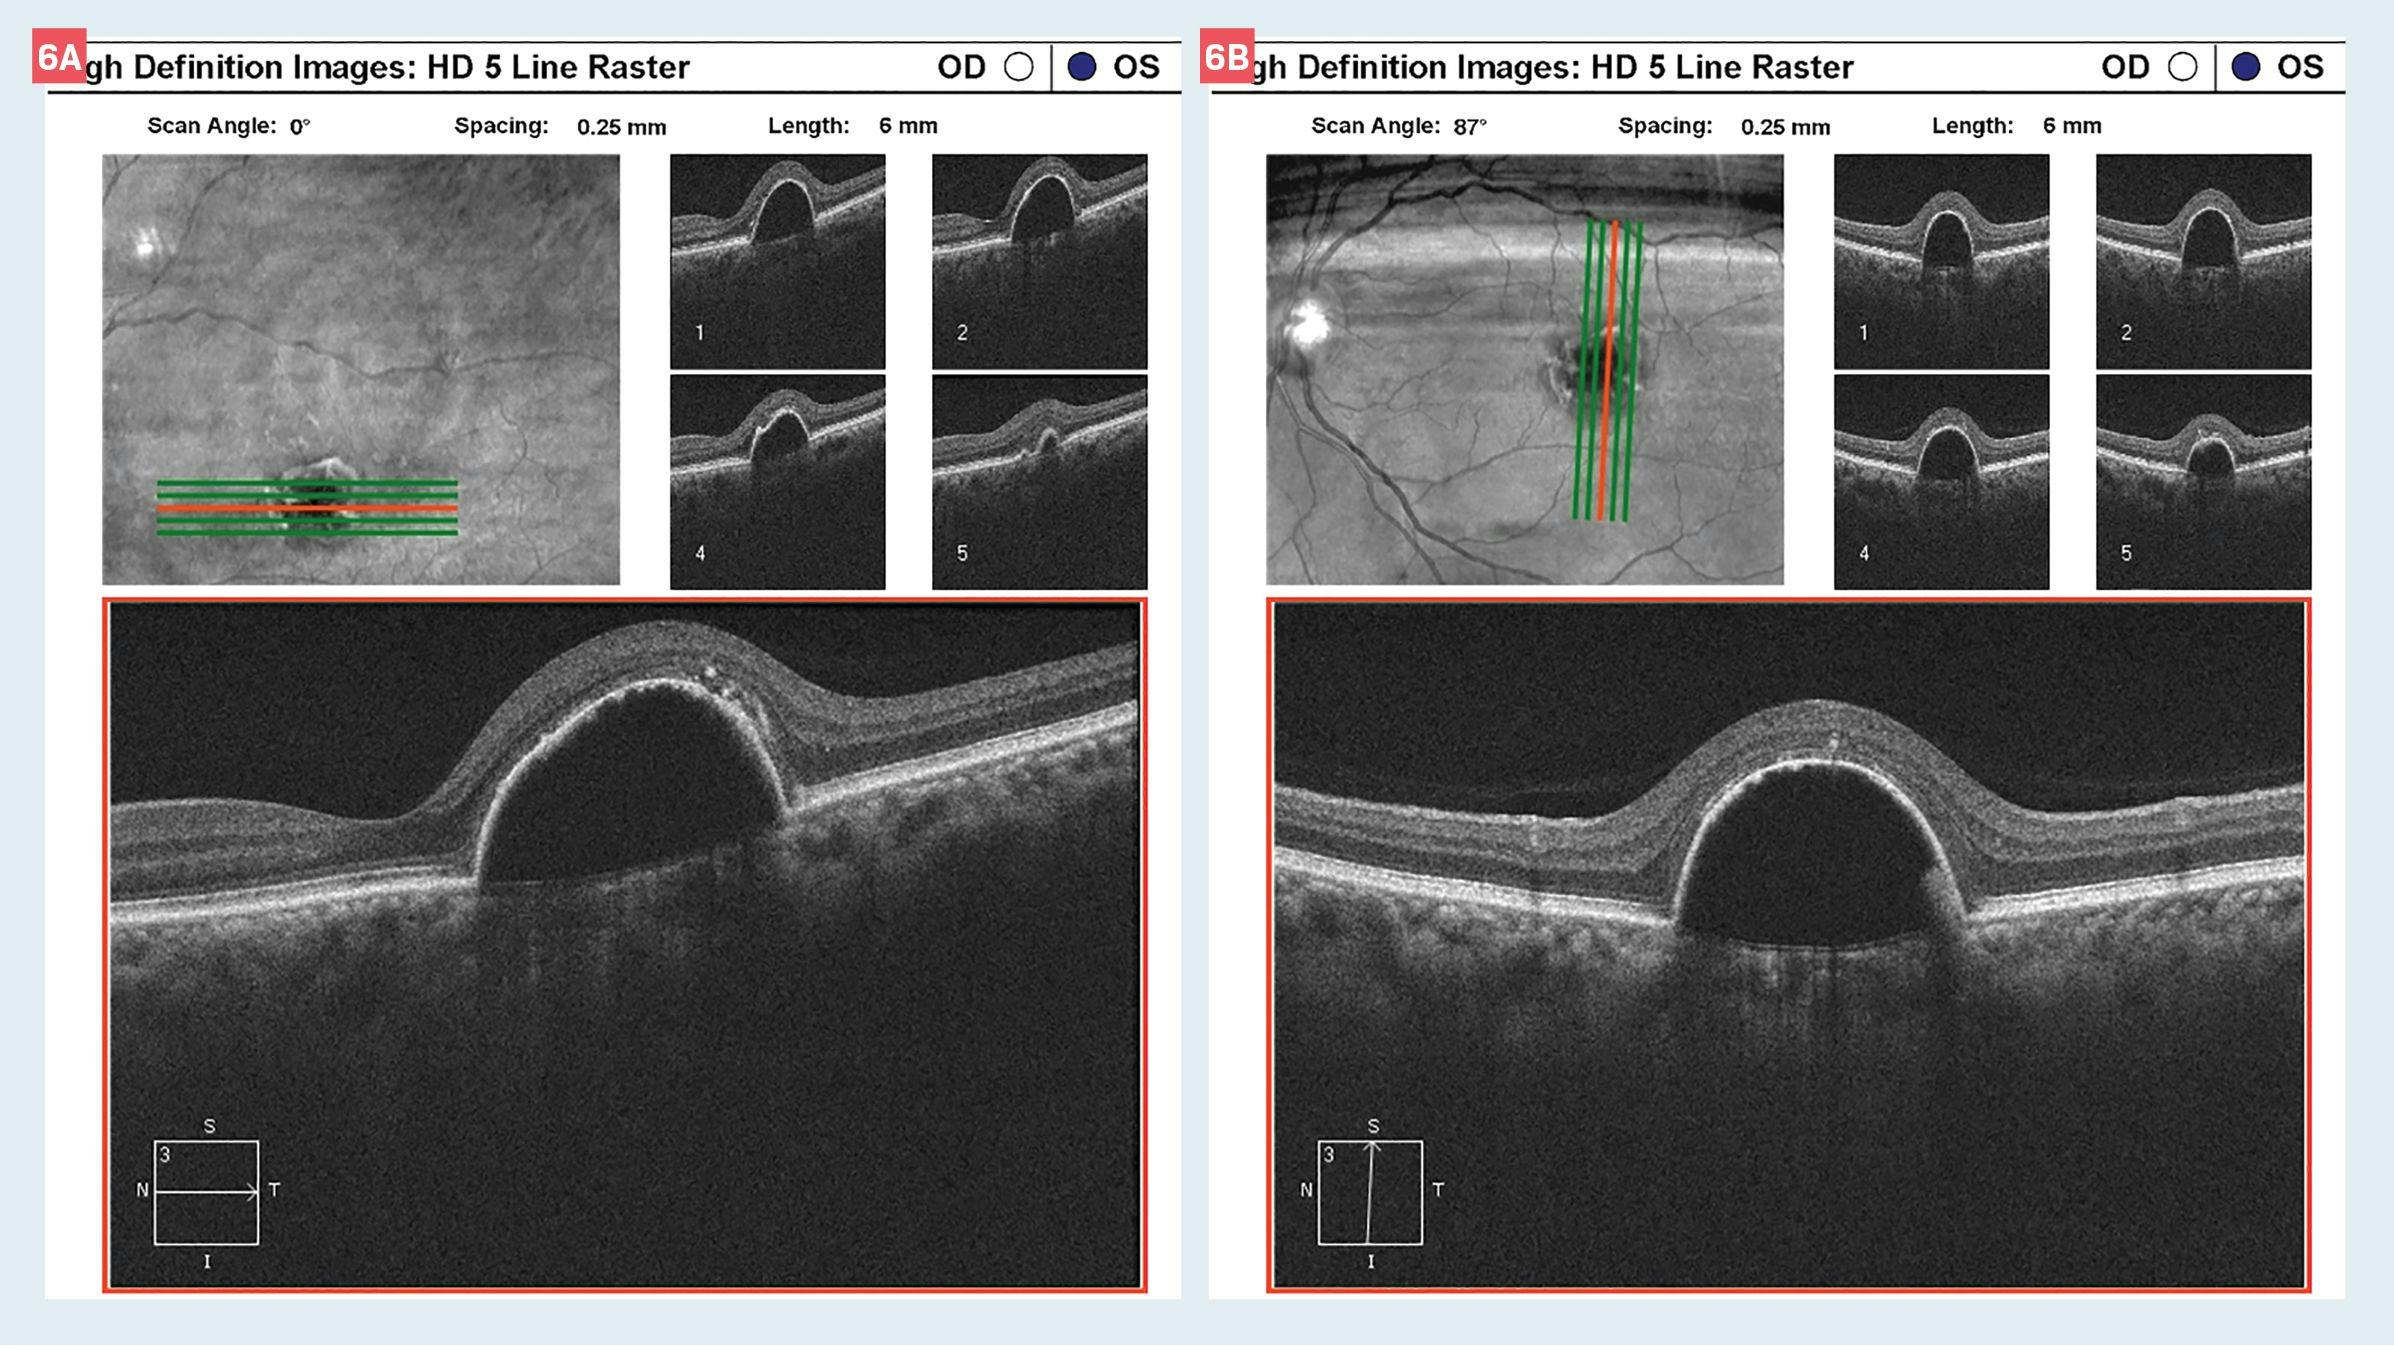 OCT corresponding to the most recent visit showing atrophy of the overlying RPE allowing less obscuration of the serous fluid. Note that the visible macula in the left panel shows intact outer retinal laminations consistent with the preservation of 20/20 VA.